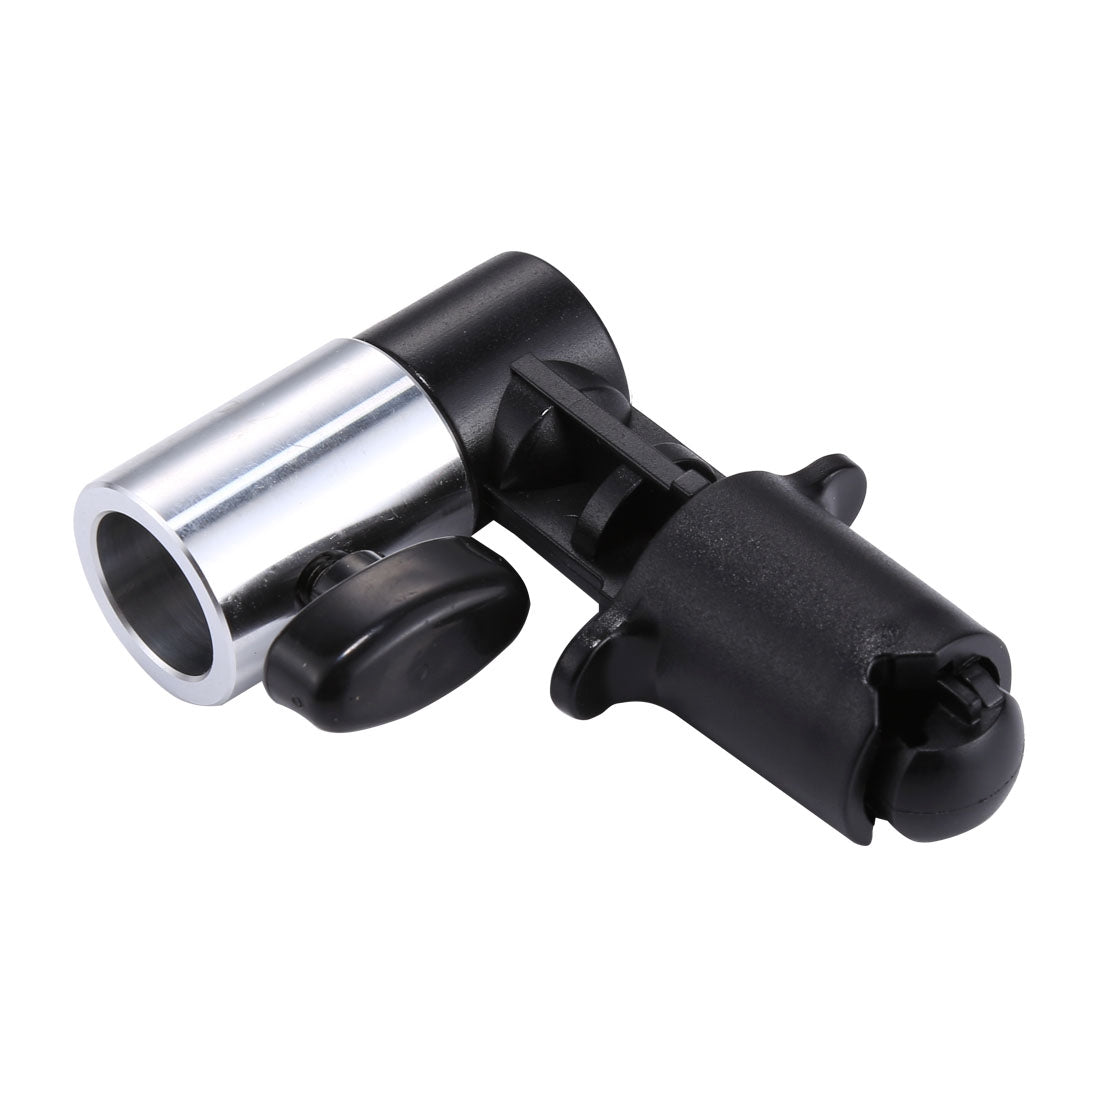 Photo Video Photography Studio Reflector Holder Clip for Light Stand